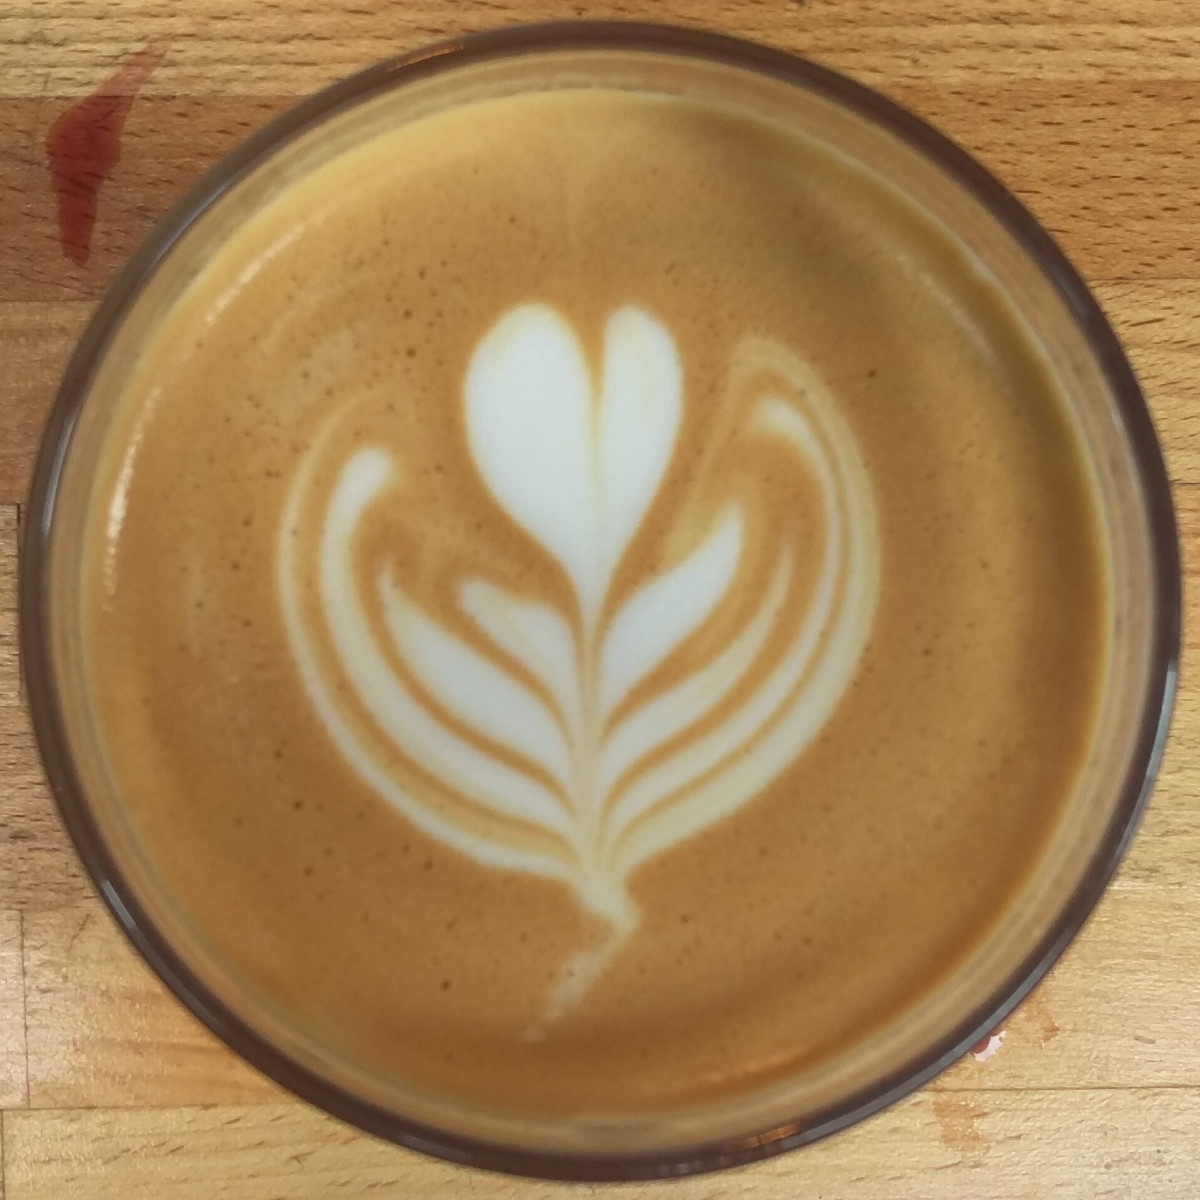 A flat white, seen from above, with a simple tulip pattern latte art.